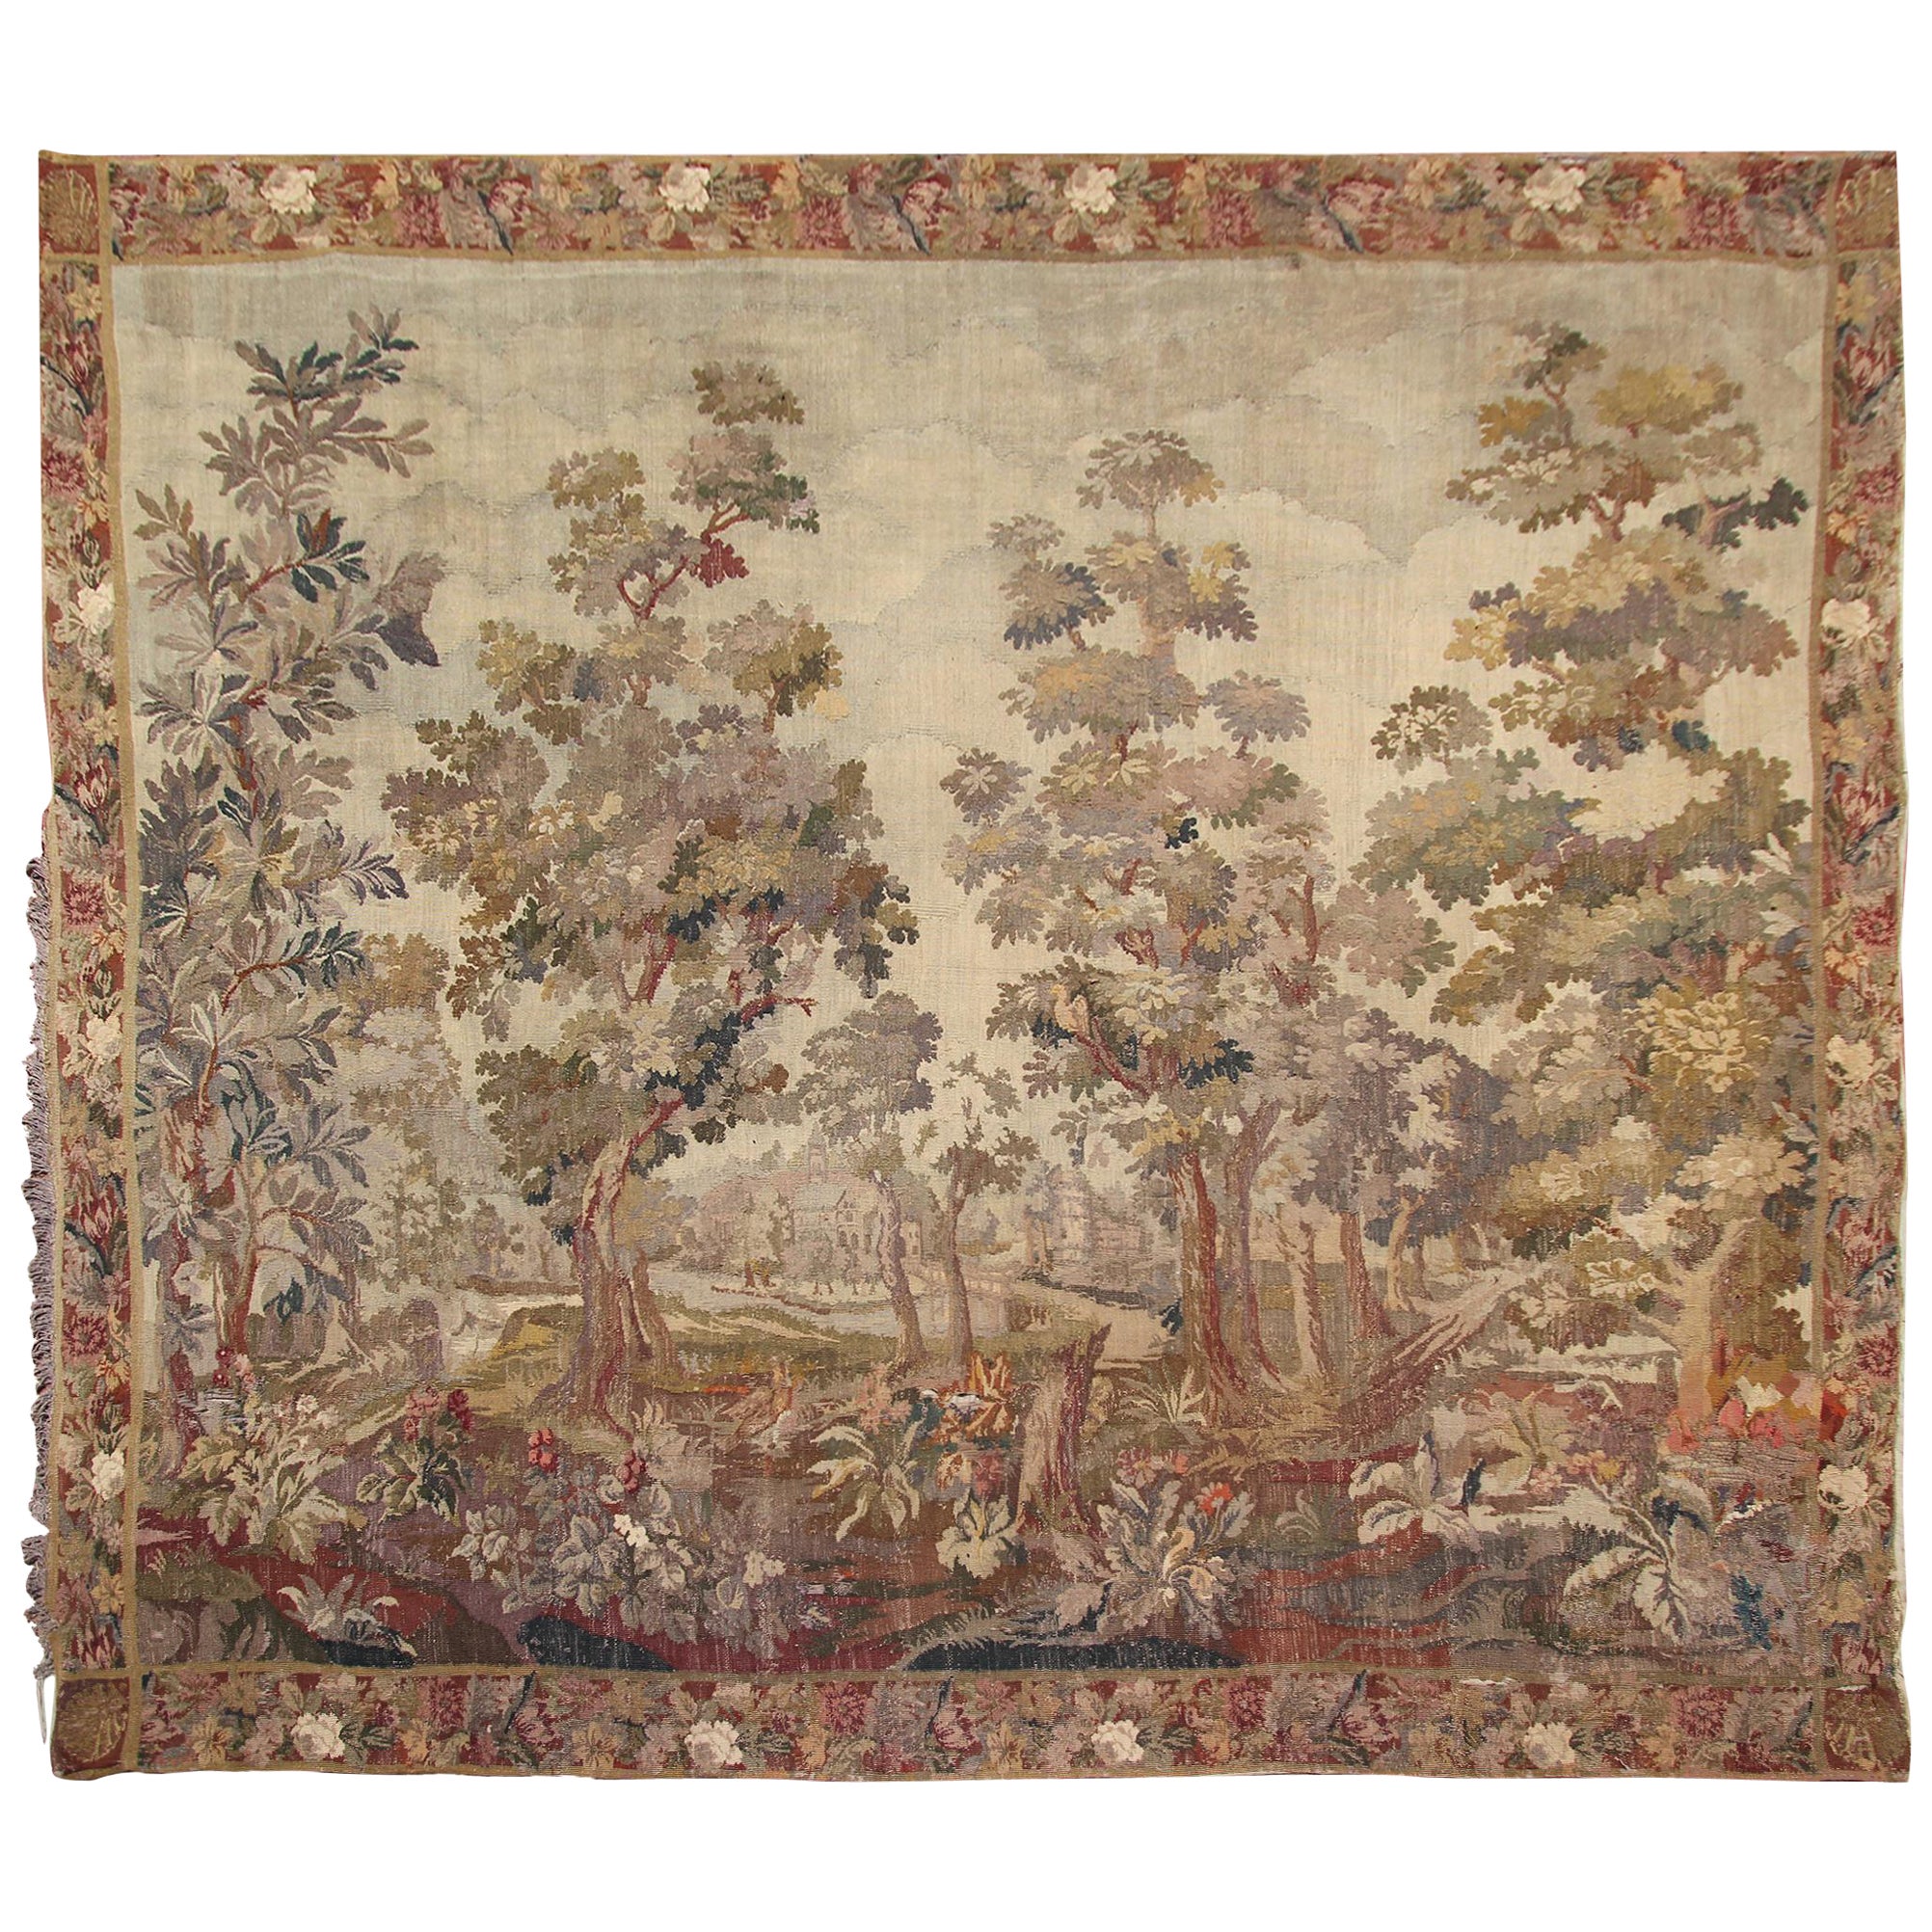 1890 Handmade Antique French Tapestry Verdure 10x11 Large Tapestry 303cmx336ccm For Sale